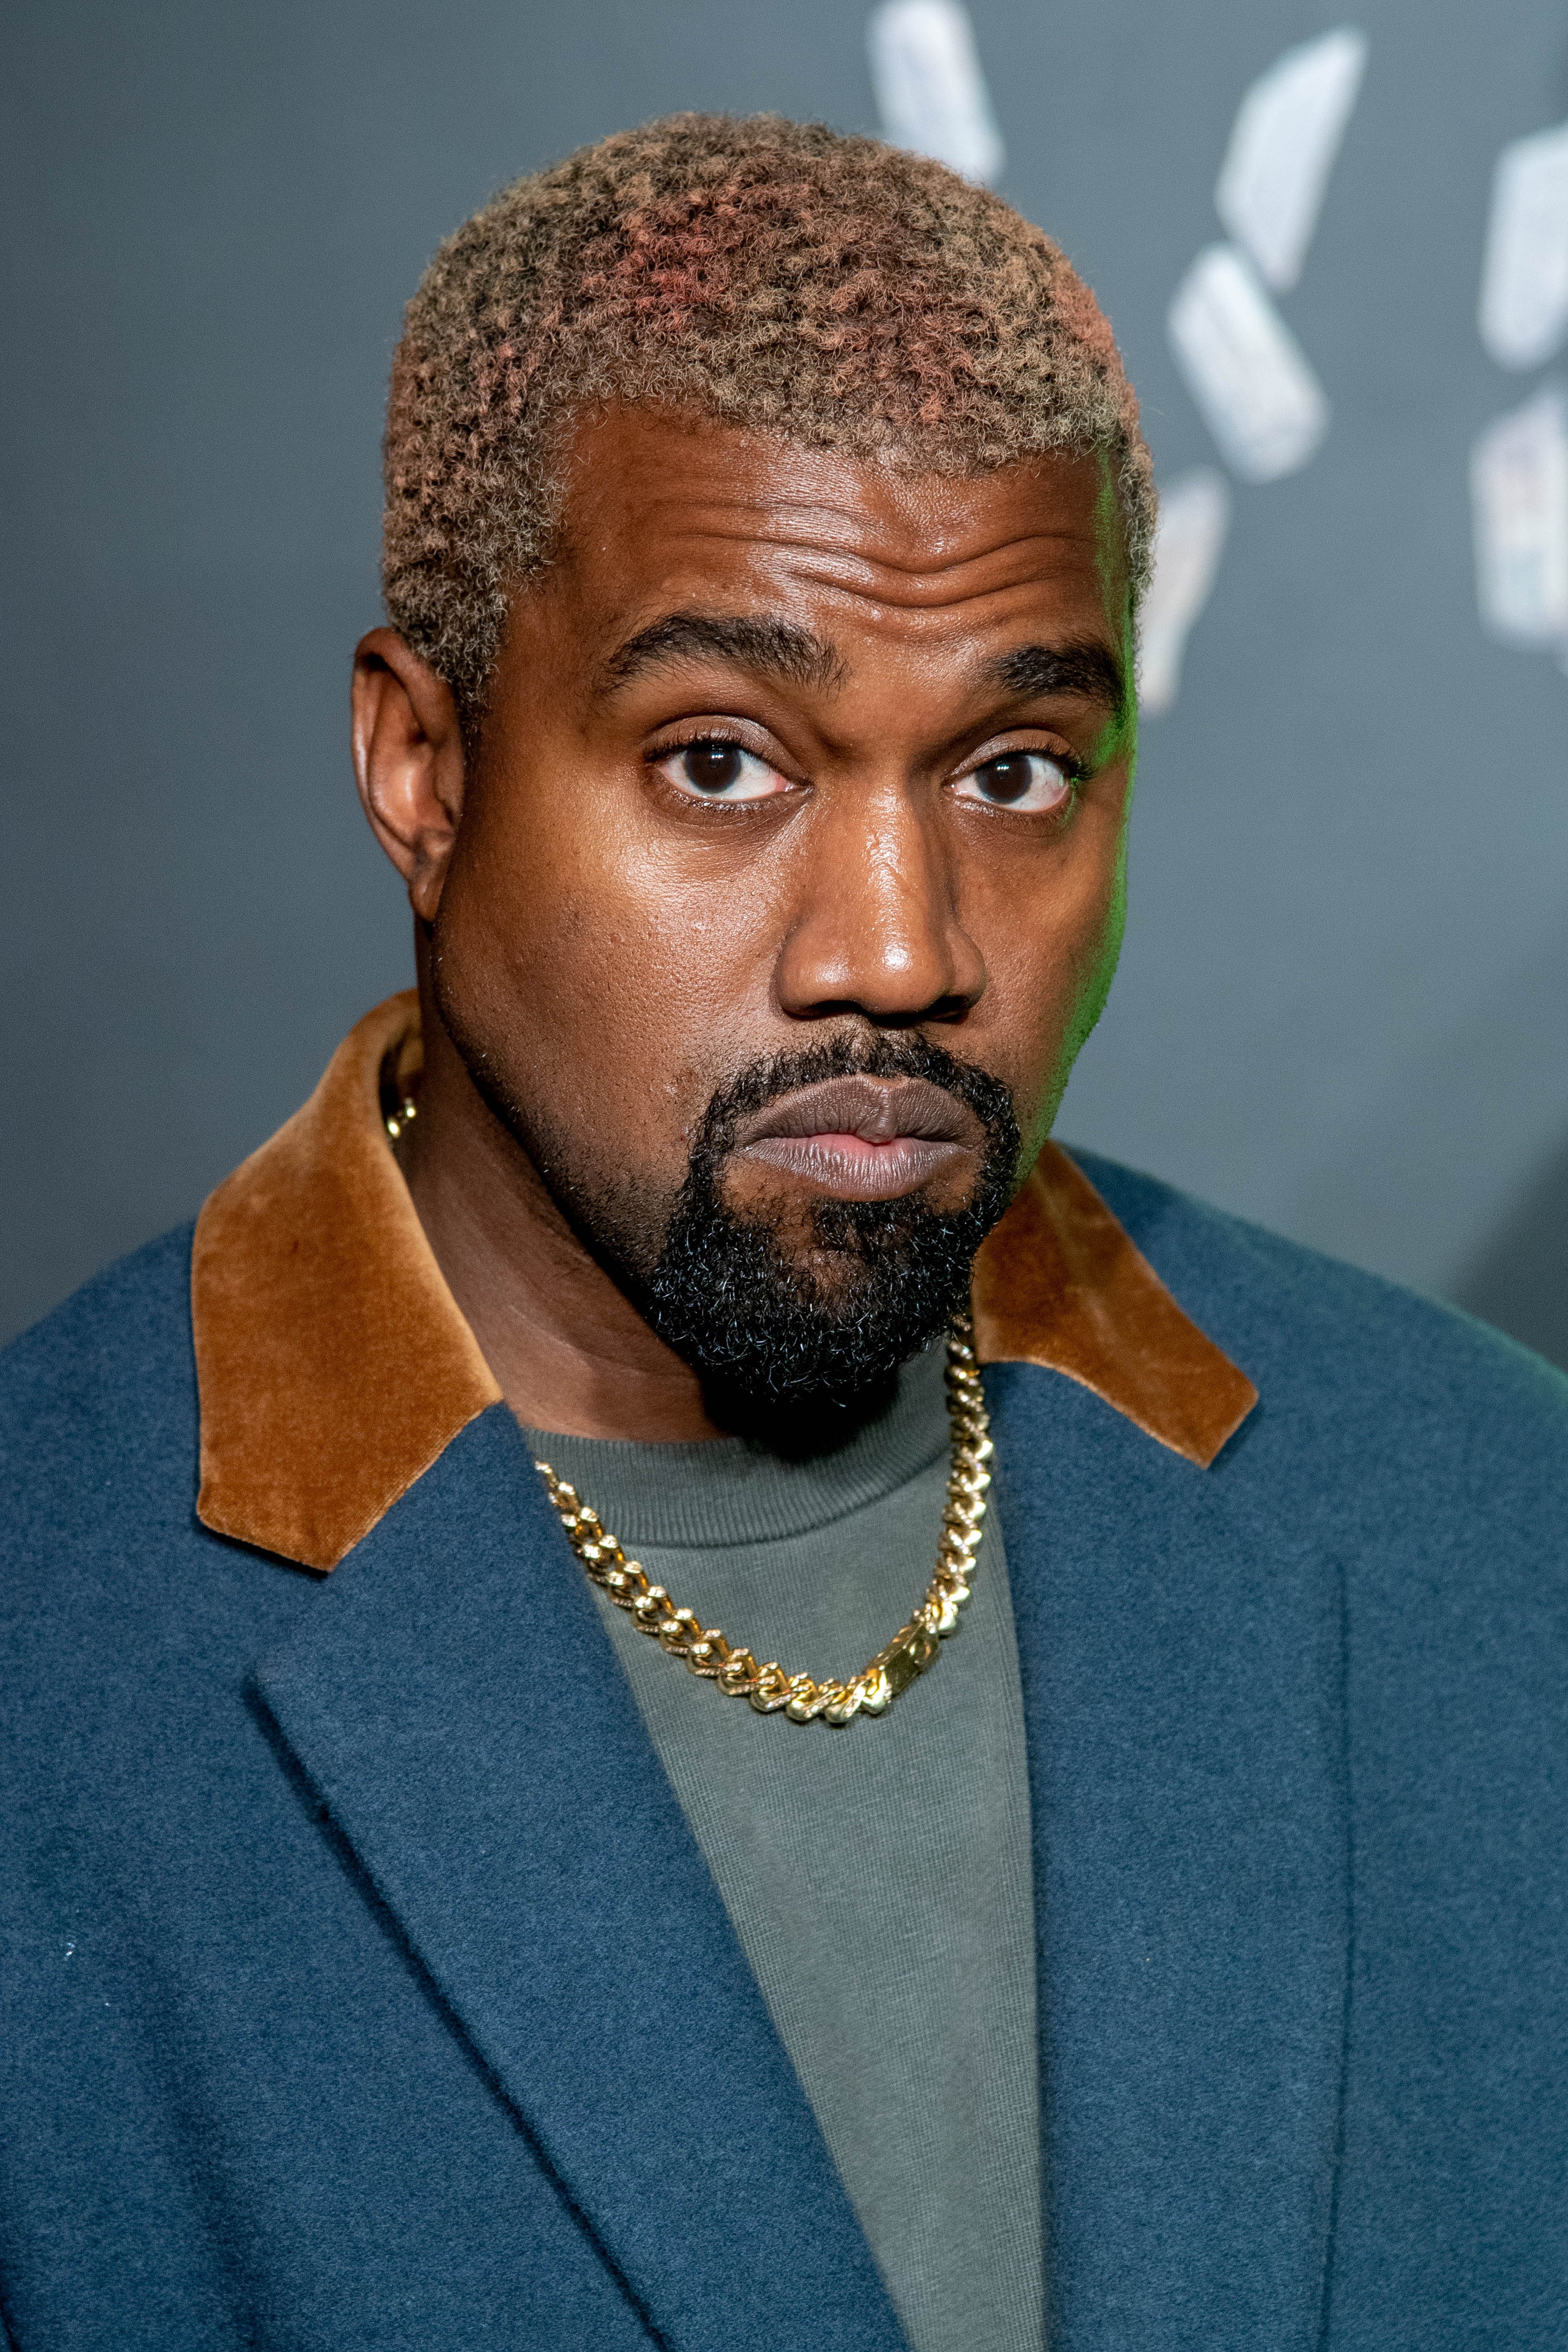 The 40-year-old filed for divorce from her rapper husband Kanye West earlier this month